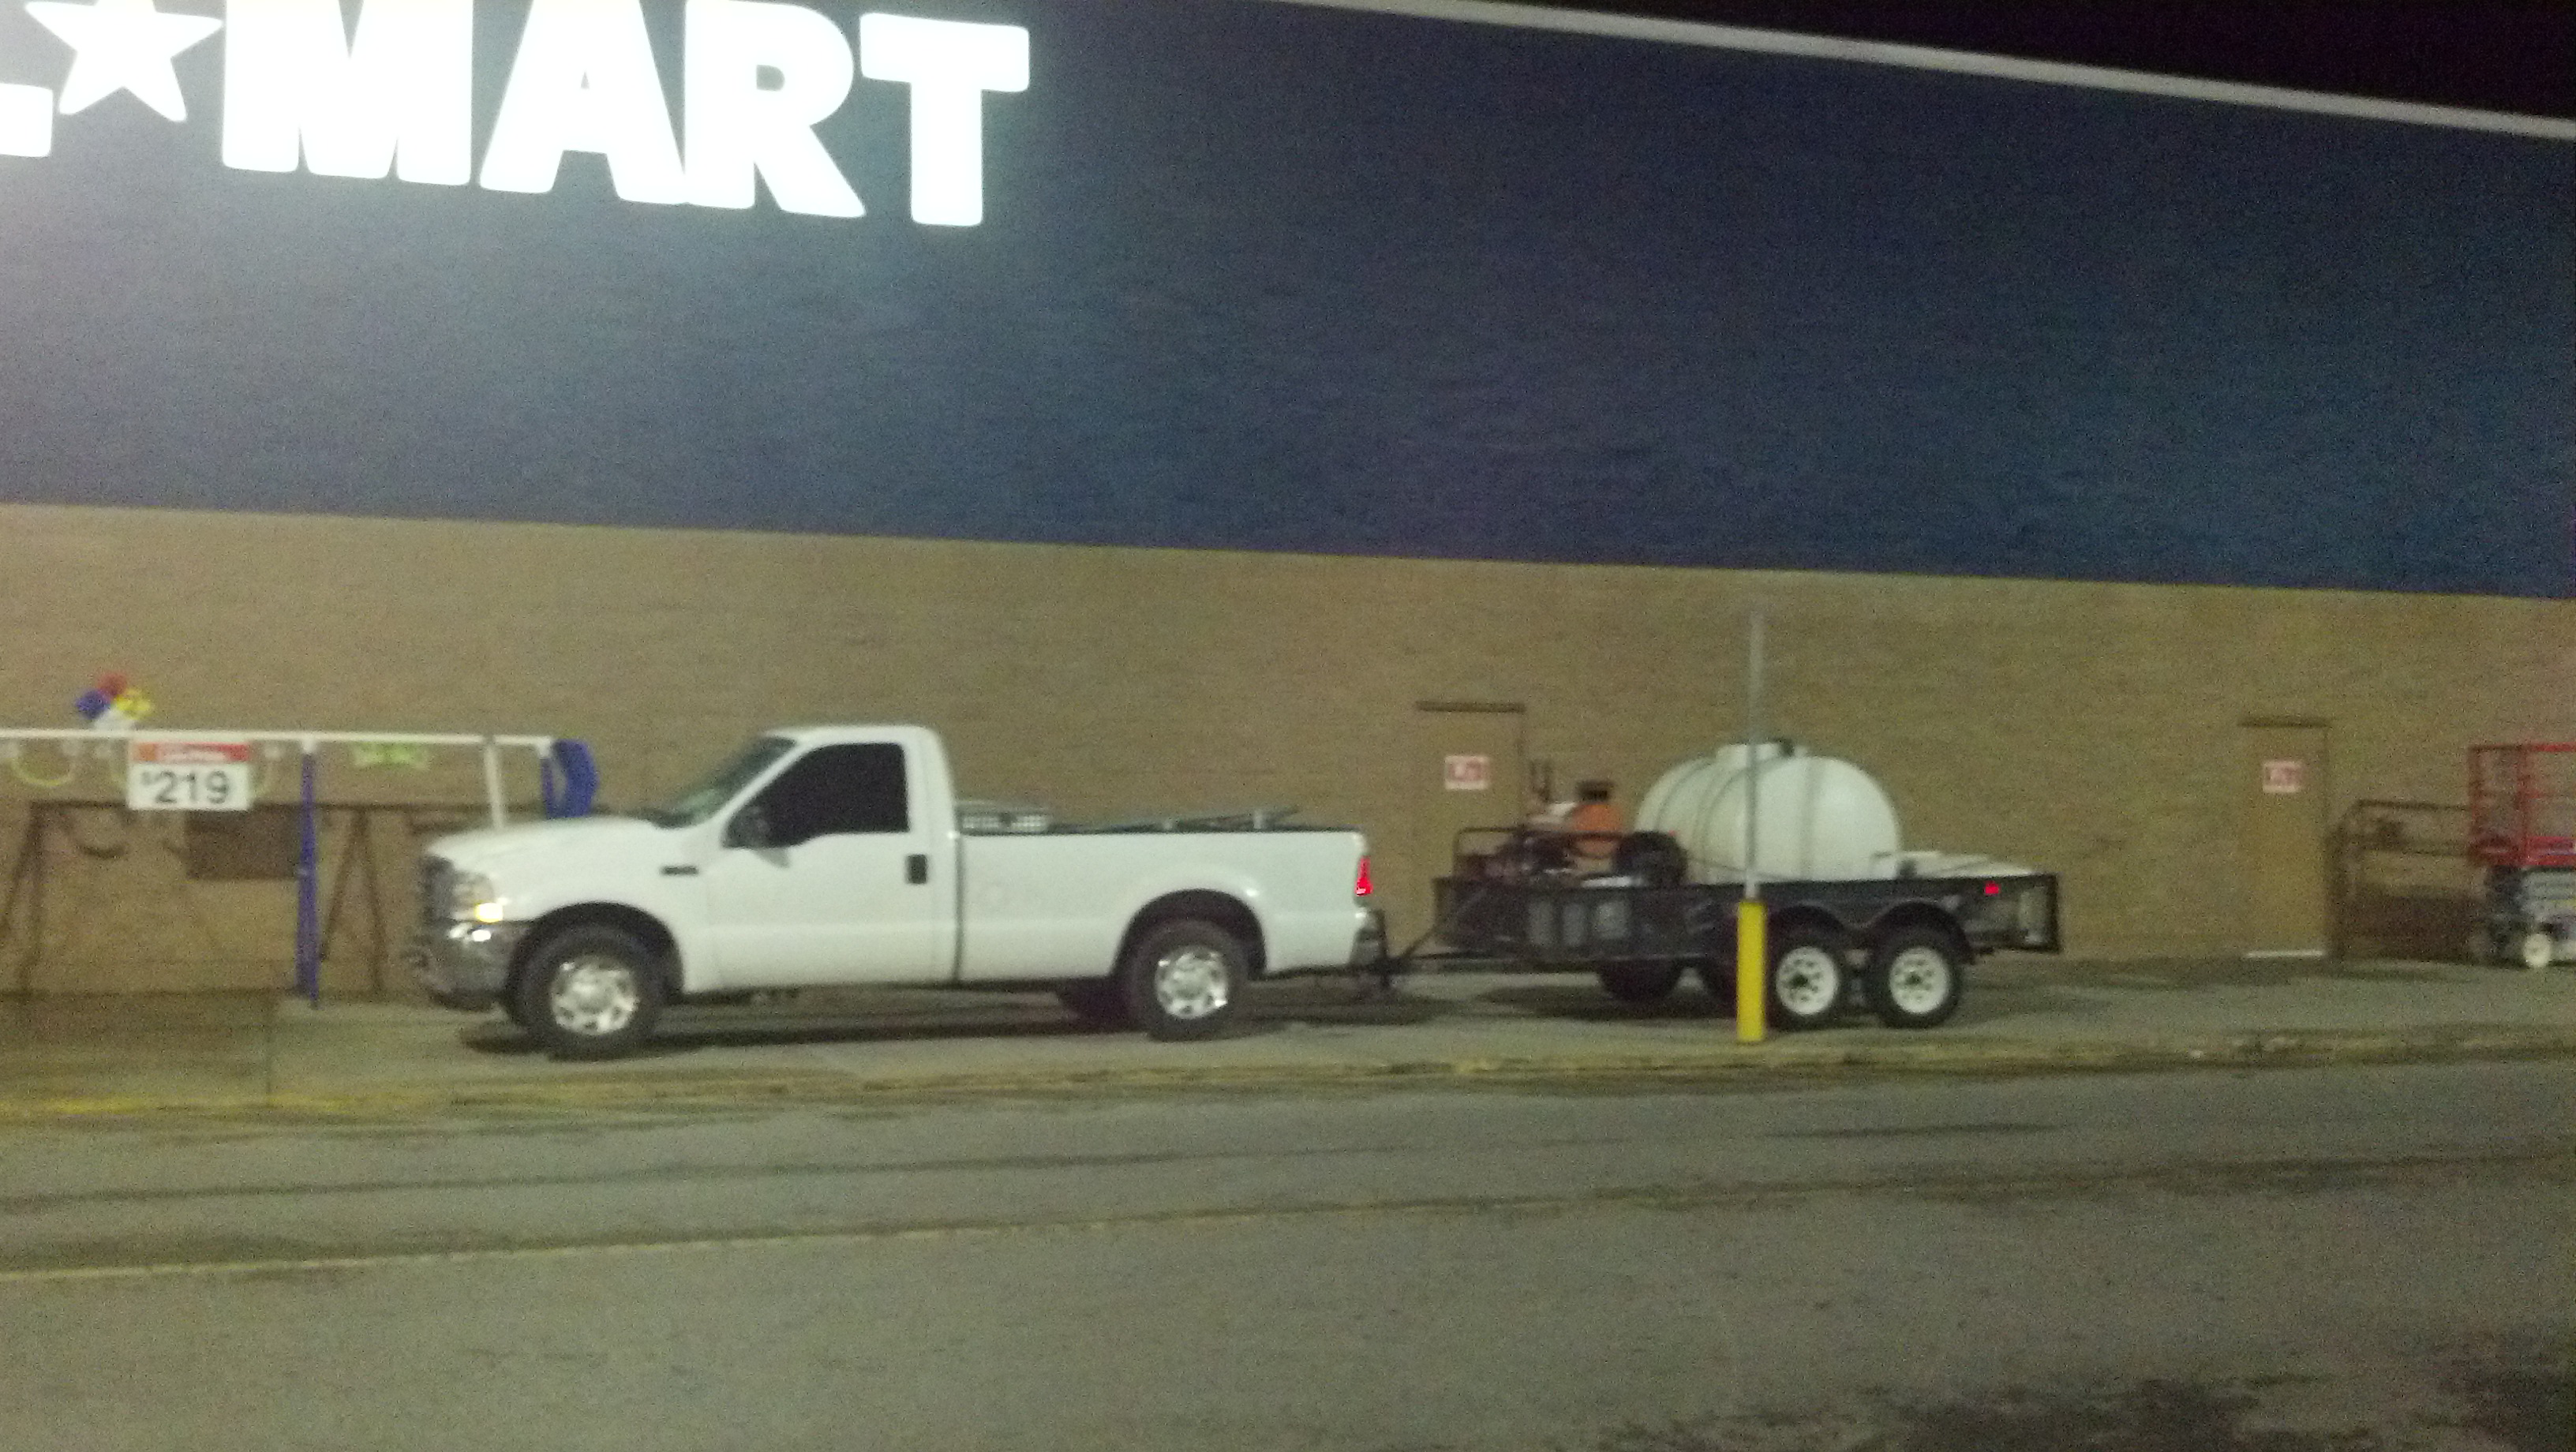 Preferred Painters pressure washing the exterior of this Walmart in Florence Alabama, preparing it for paintiong.